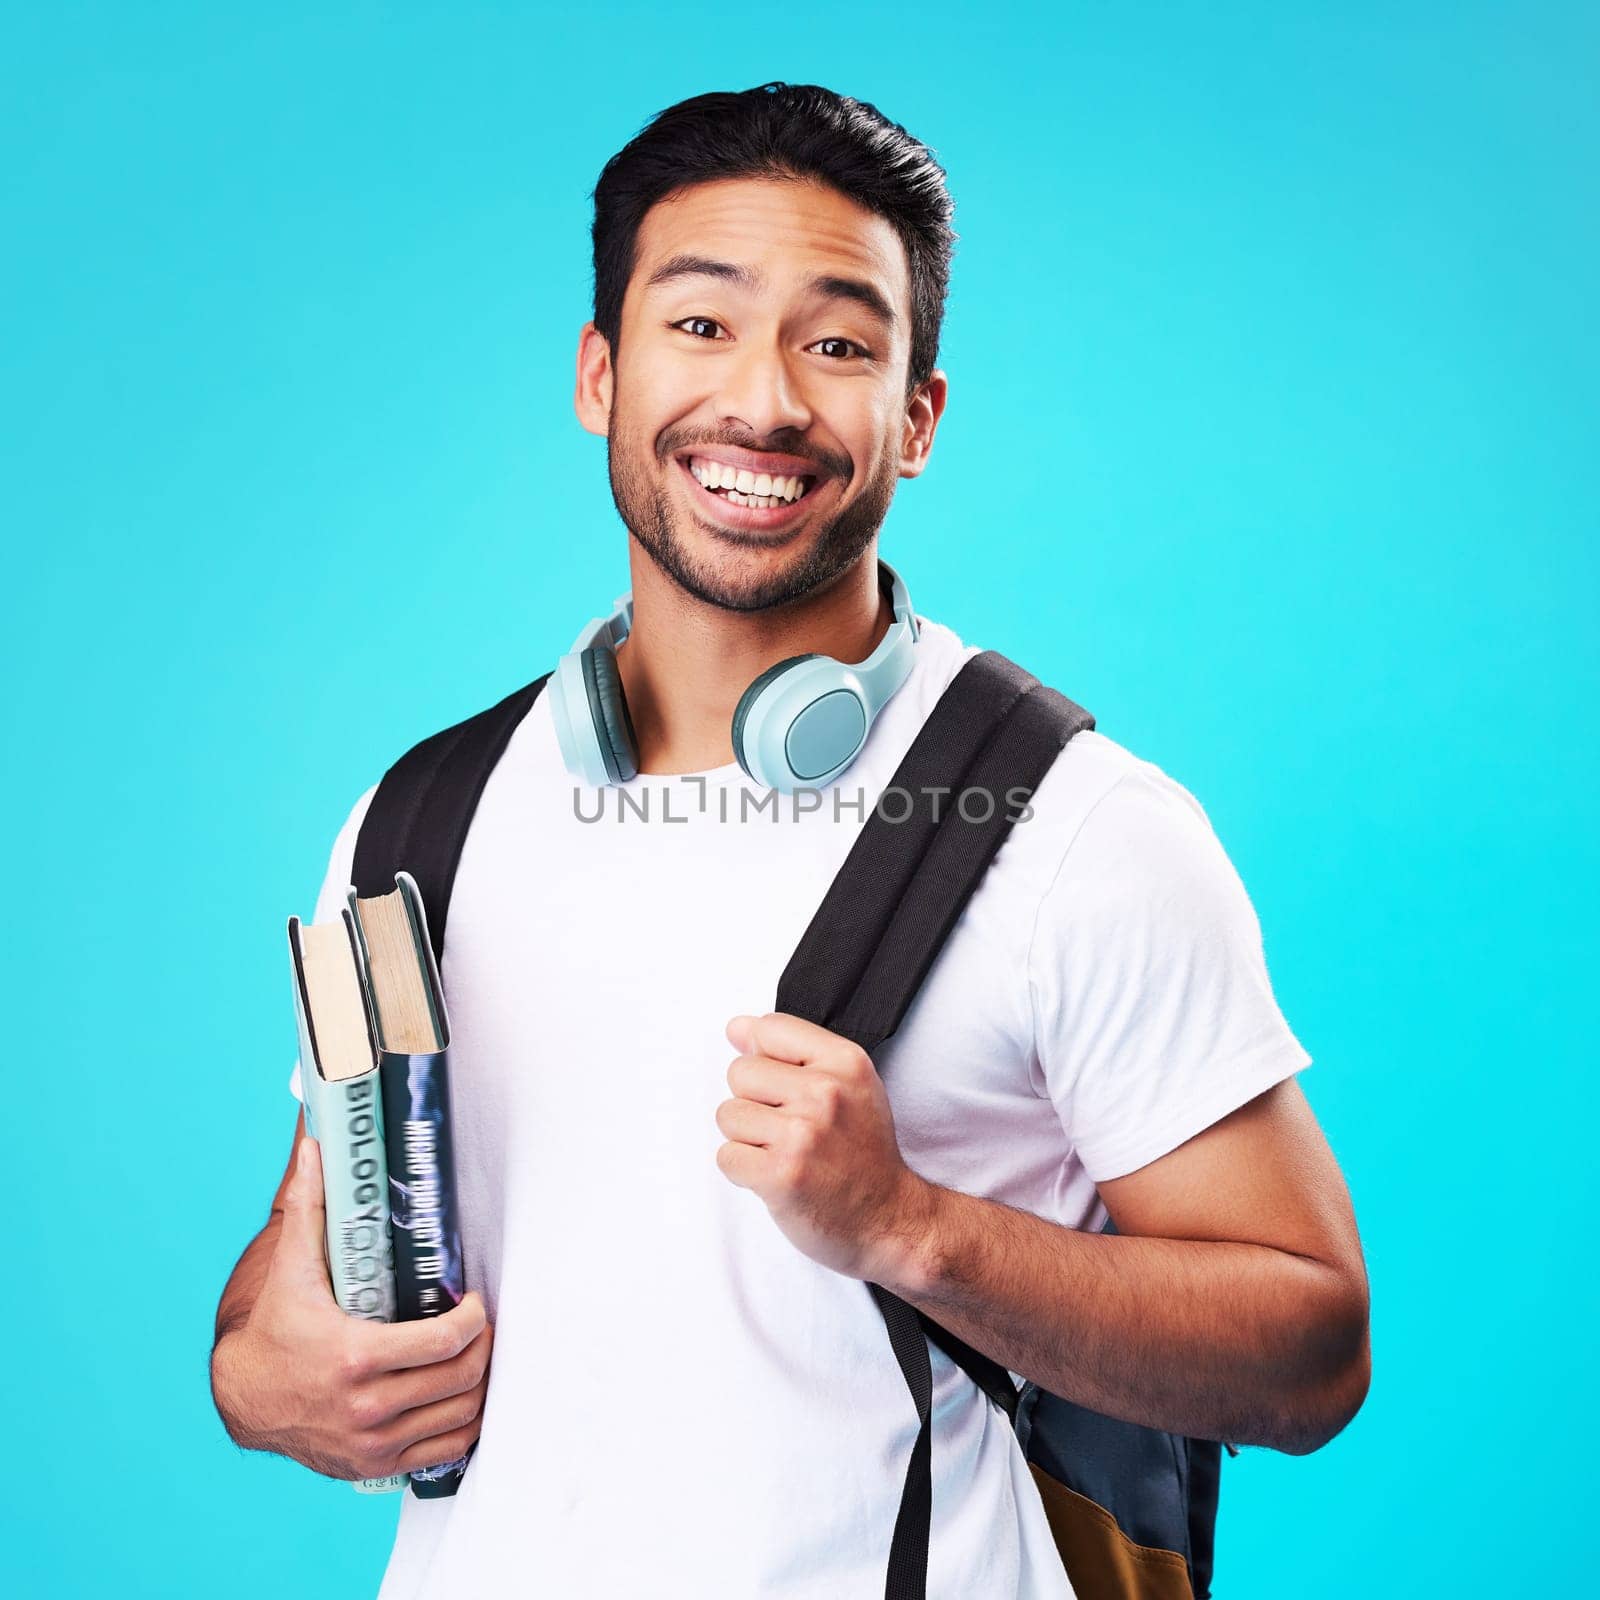 Indian, college student and portrait in studio with backpack for university, education and studying with books on blue background. Happy, man and person excited to study and learn for future goals.